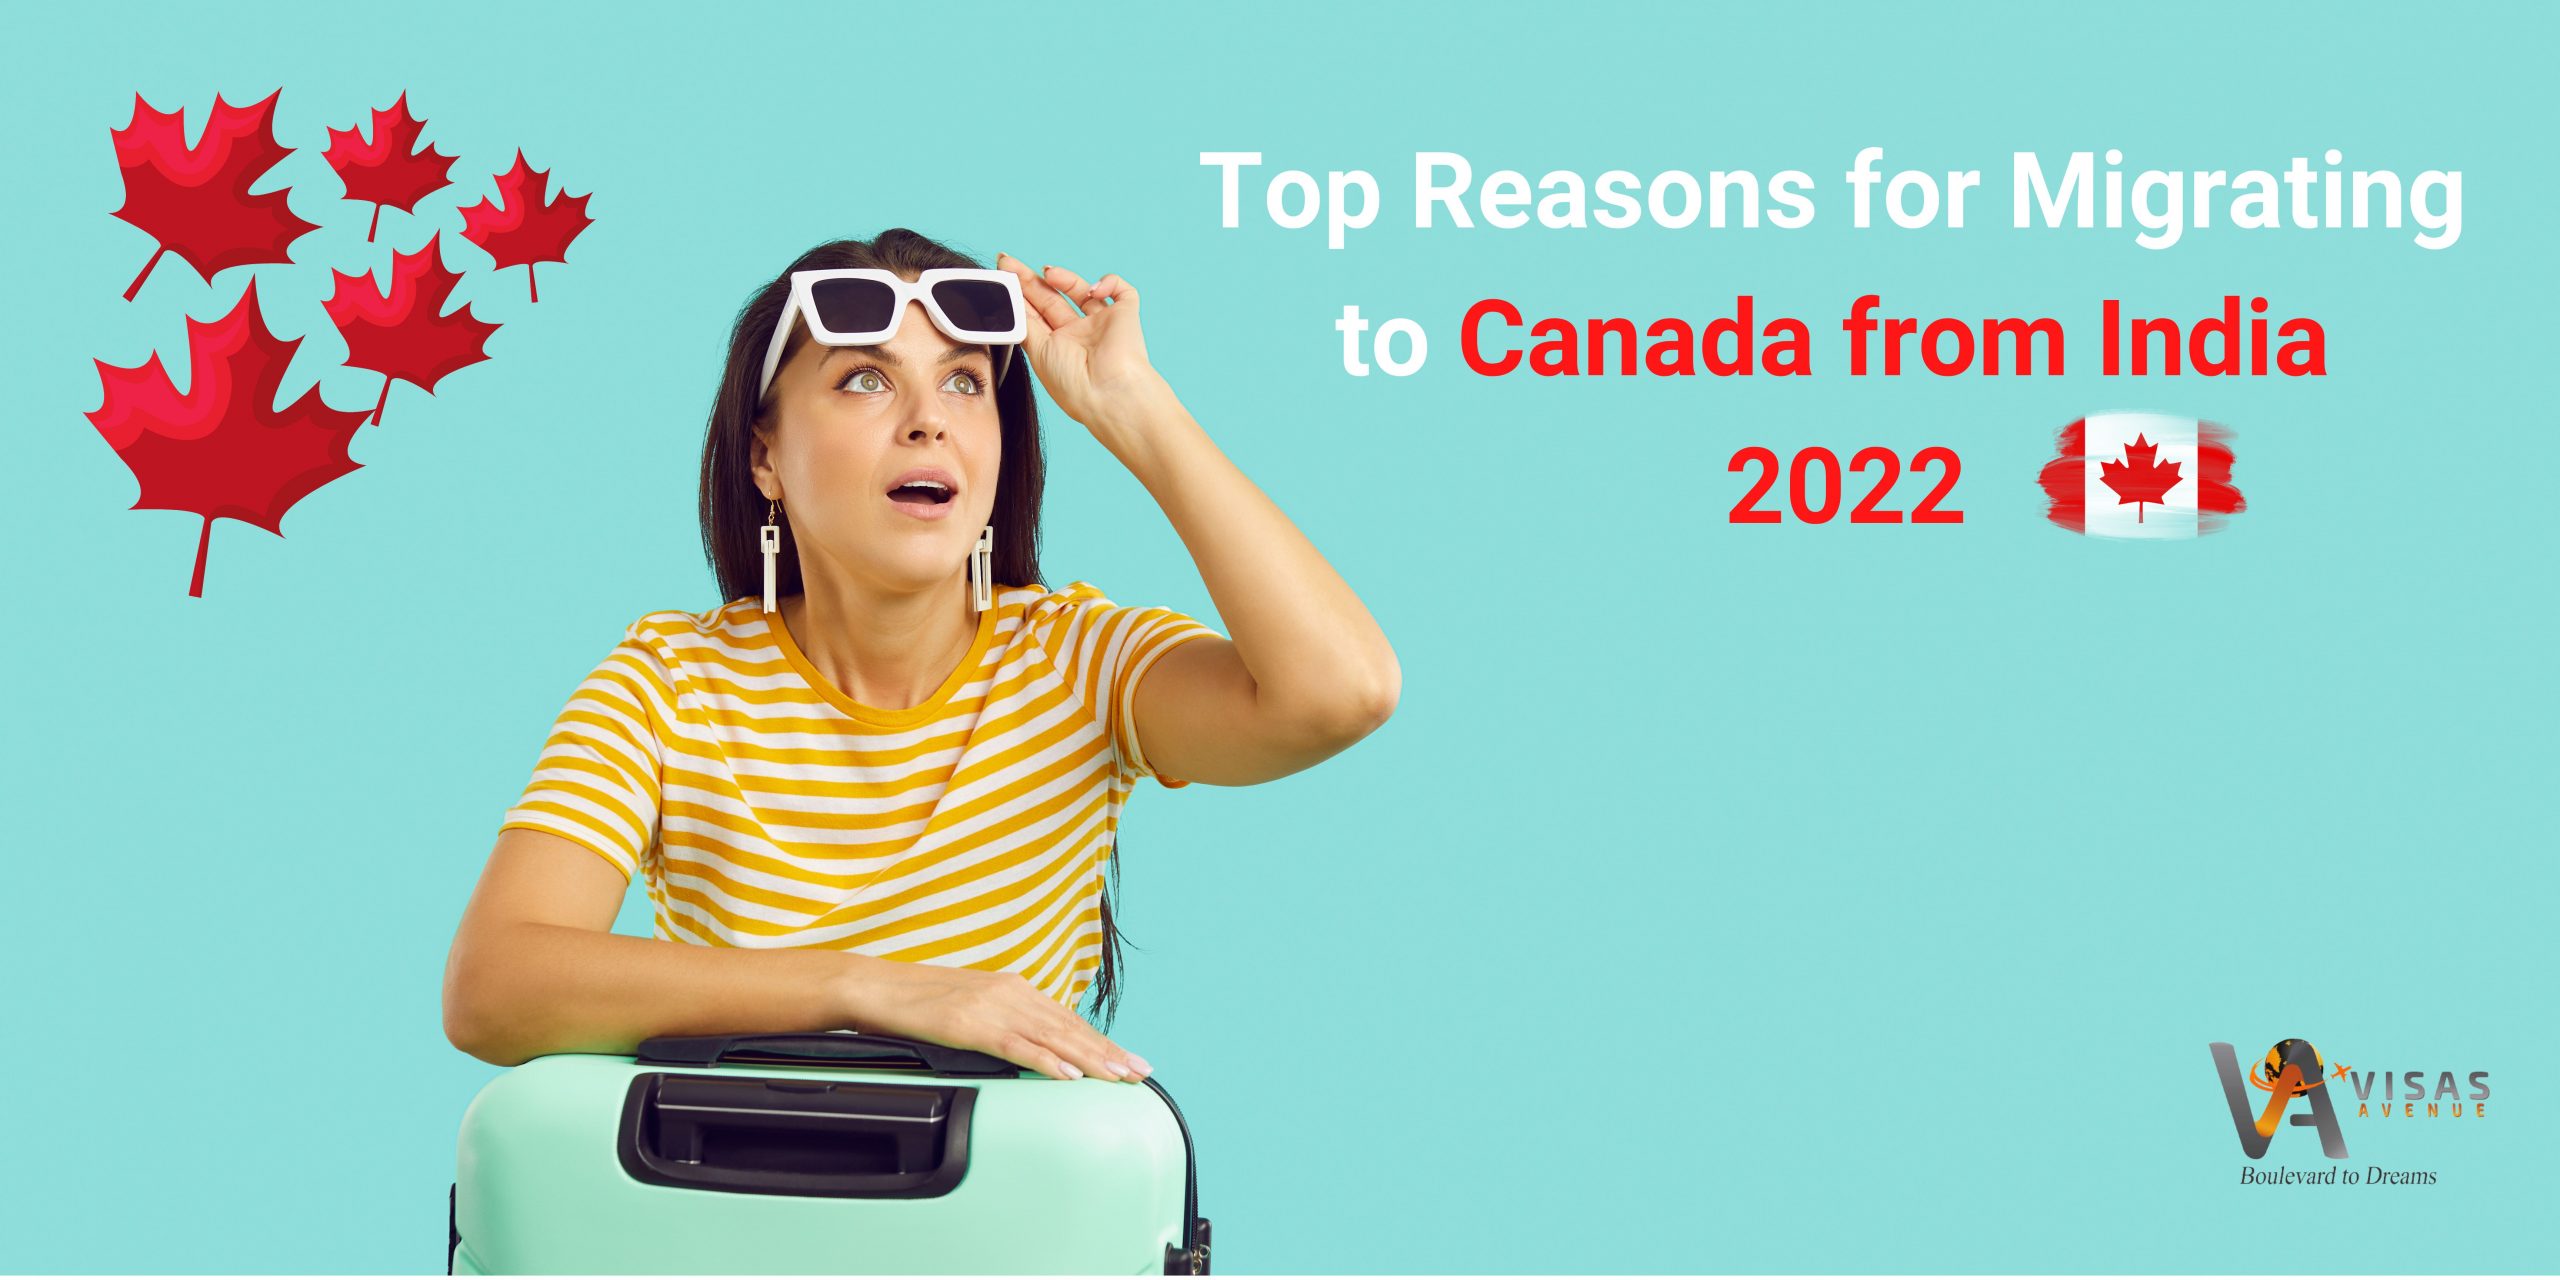 Reasons for migrating to Canada from India 2022